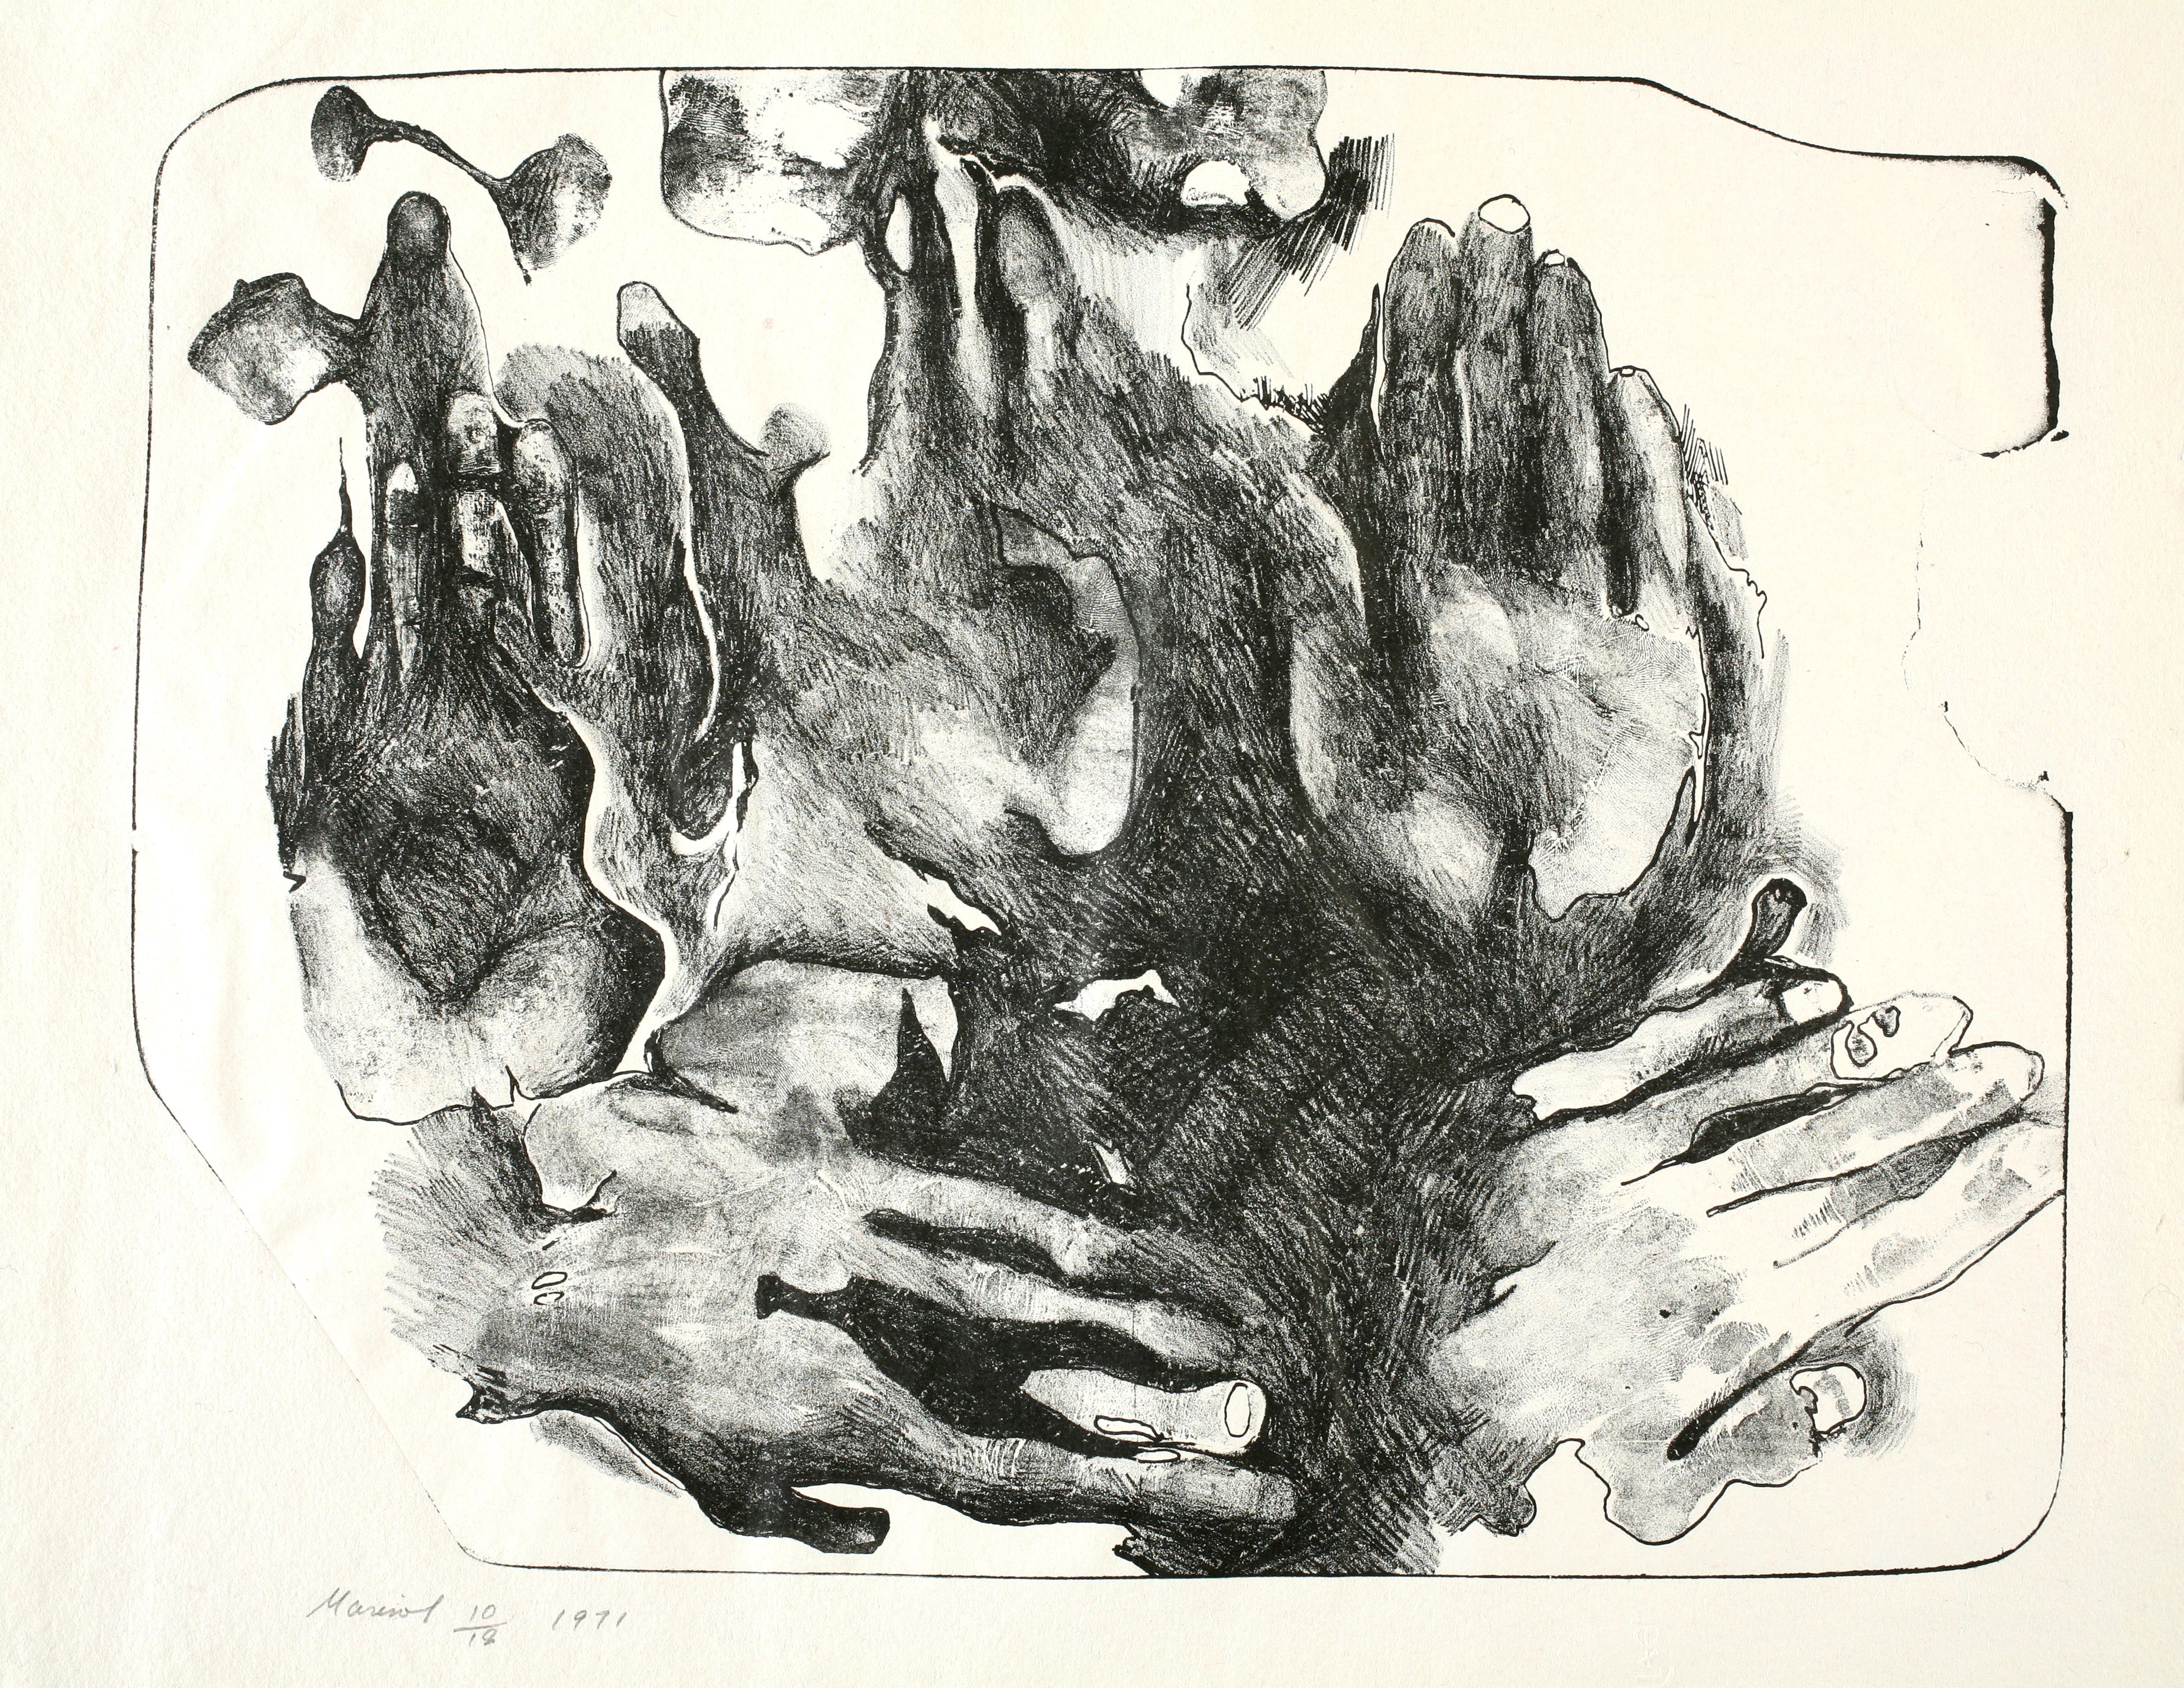 Marisol Escobar's Five Hands and One Finger. Executed entirely in monochrome, this print portrays five hands that emerge from an amorphous patch of black ink in the center of the composition.